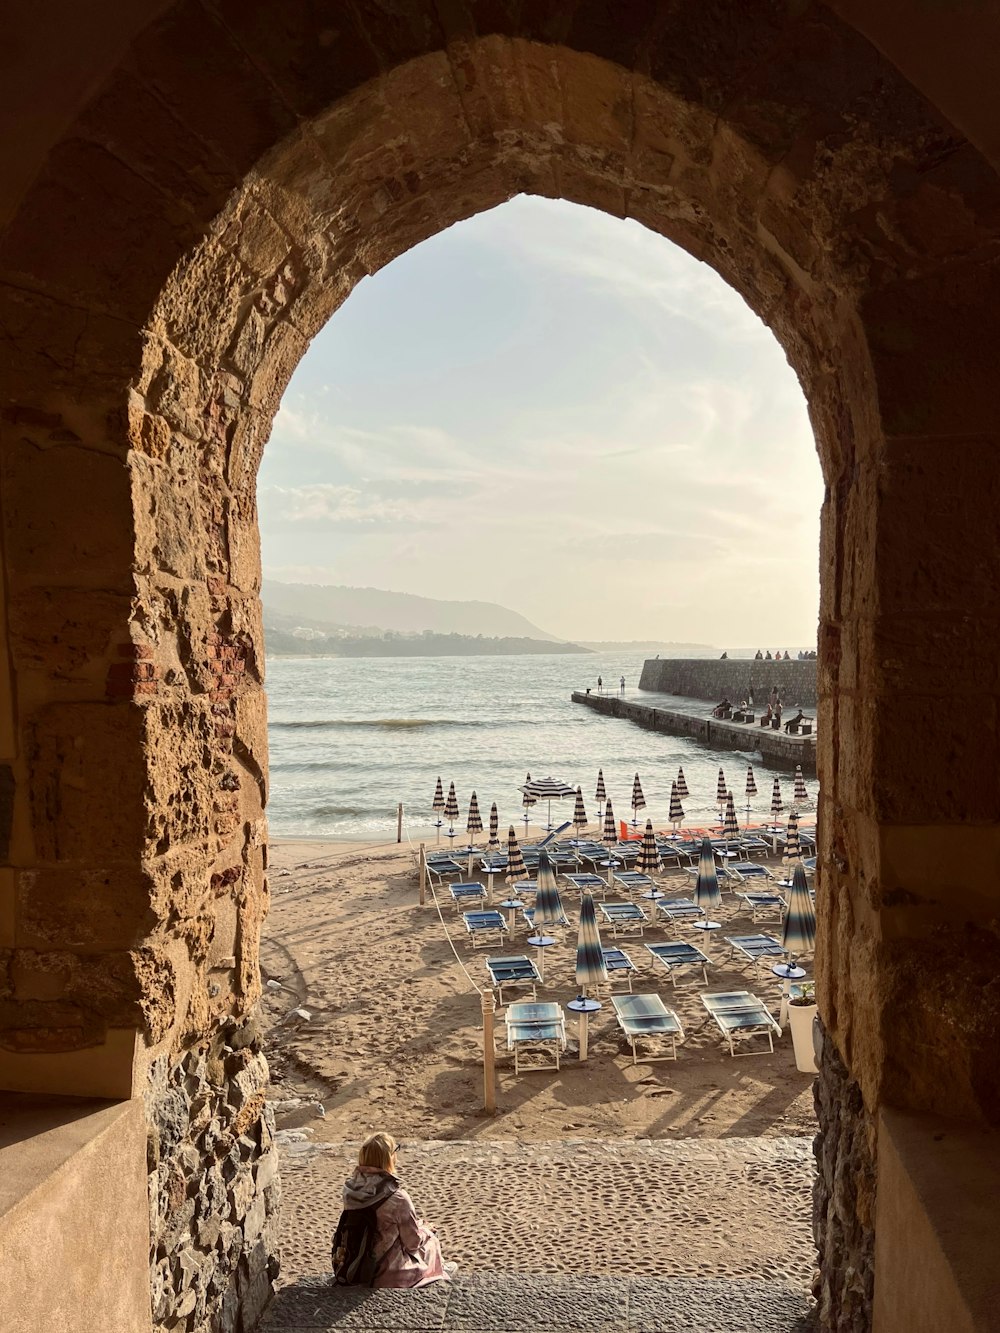 a person sitting on a beach under an archway